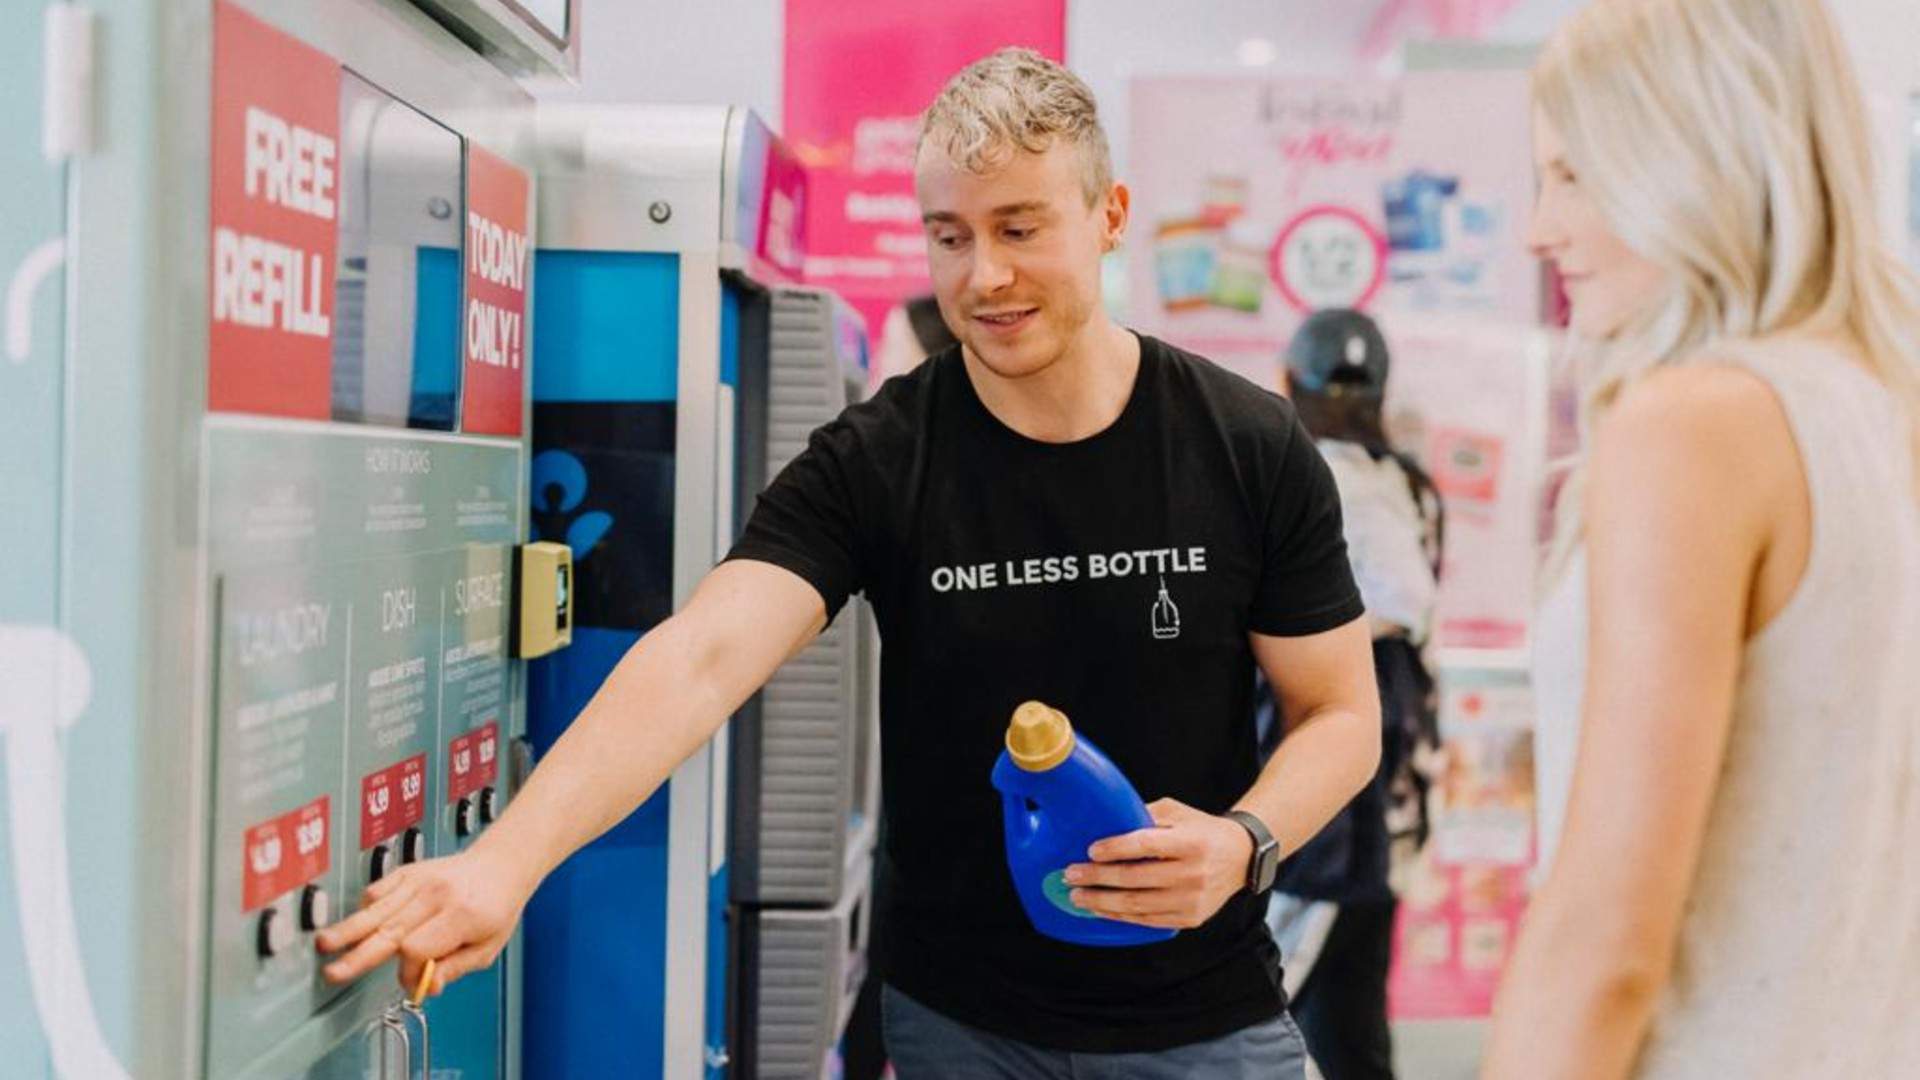 One Less Bottle Is the Refill Station for Household Cleaning Products That's Helping Nix Plastic Waste